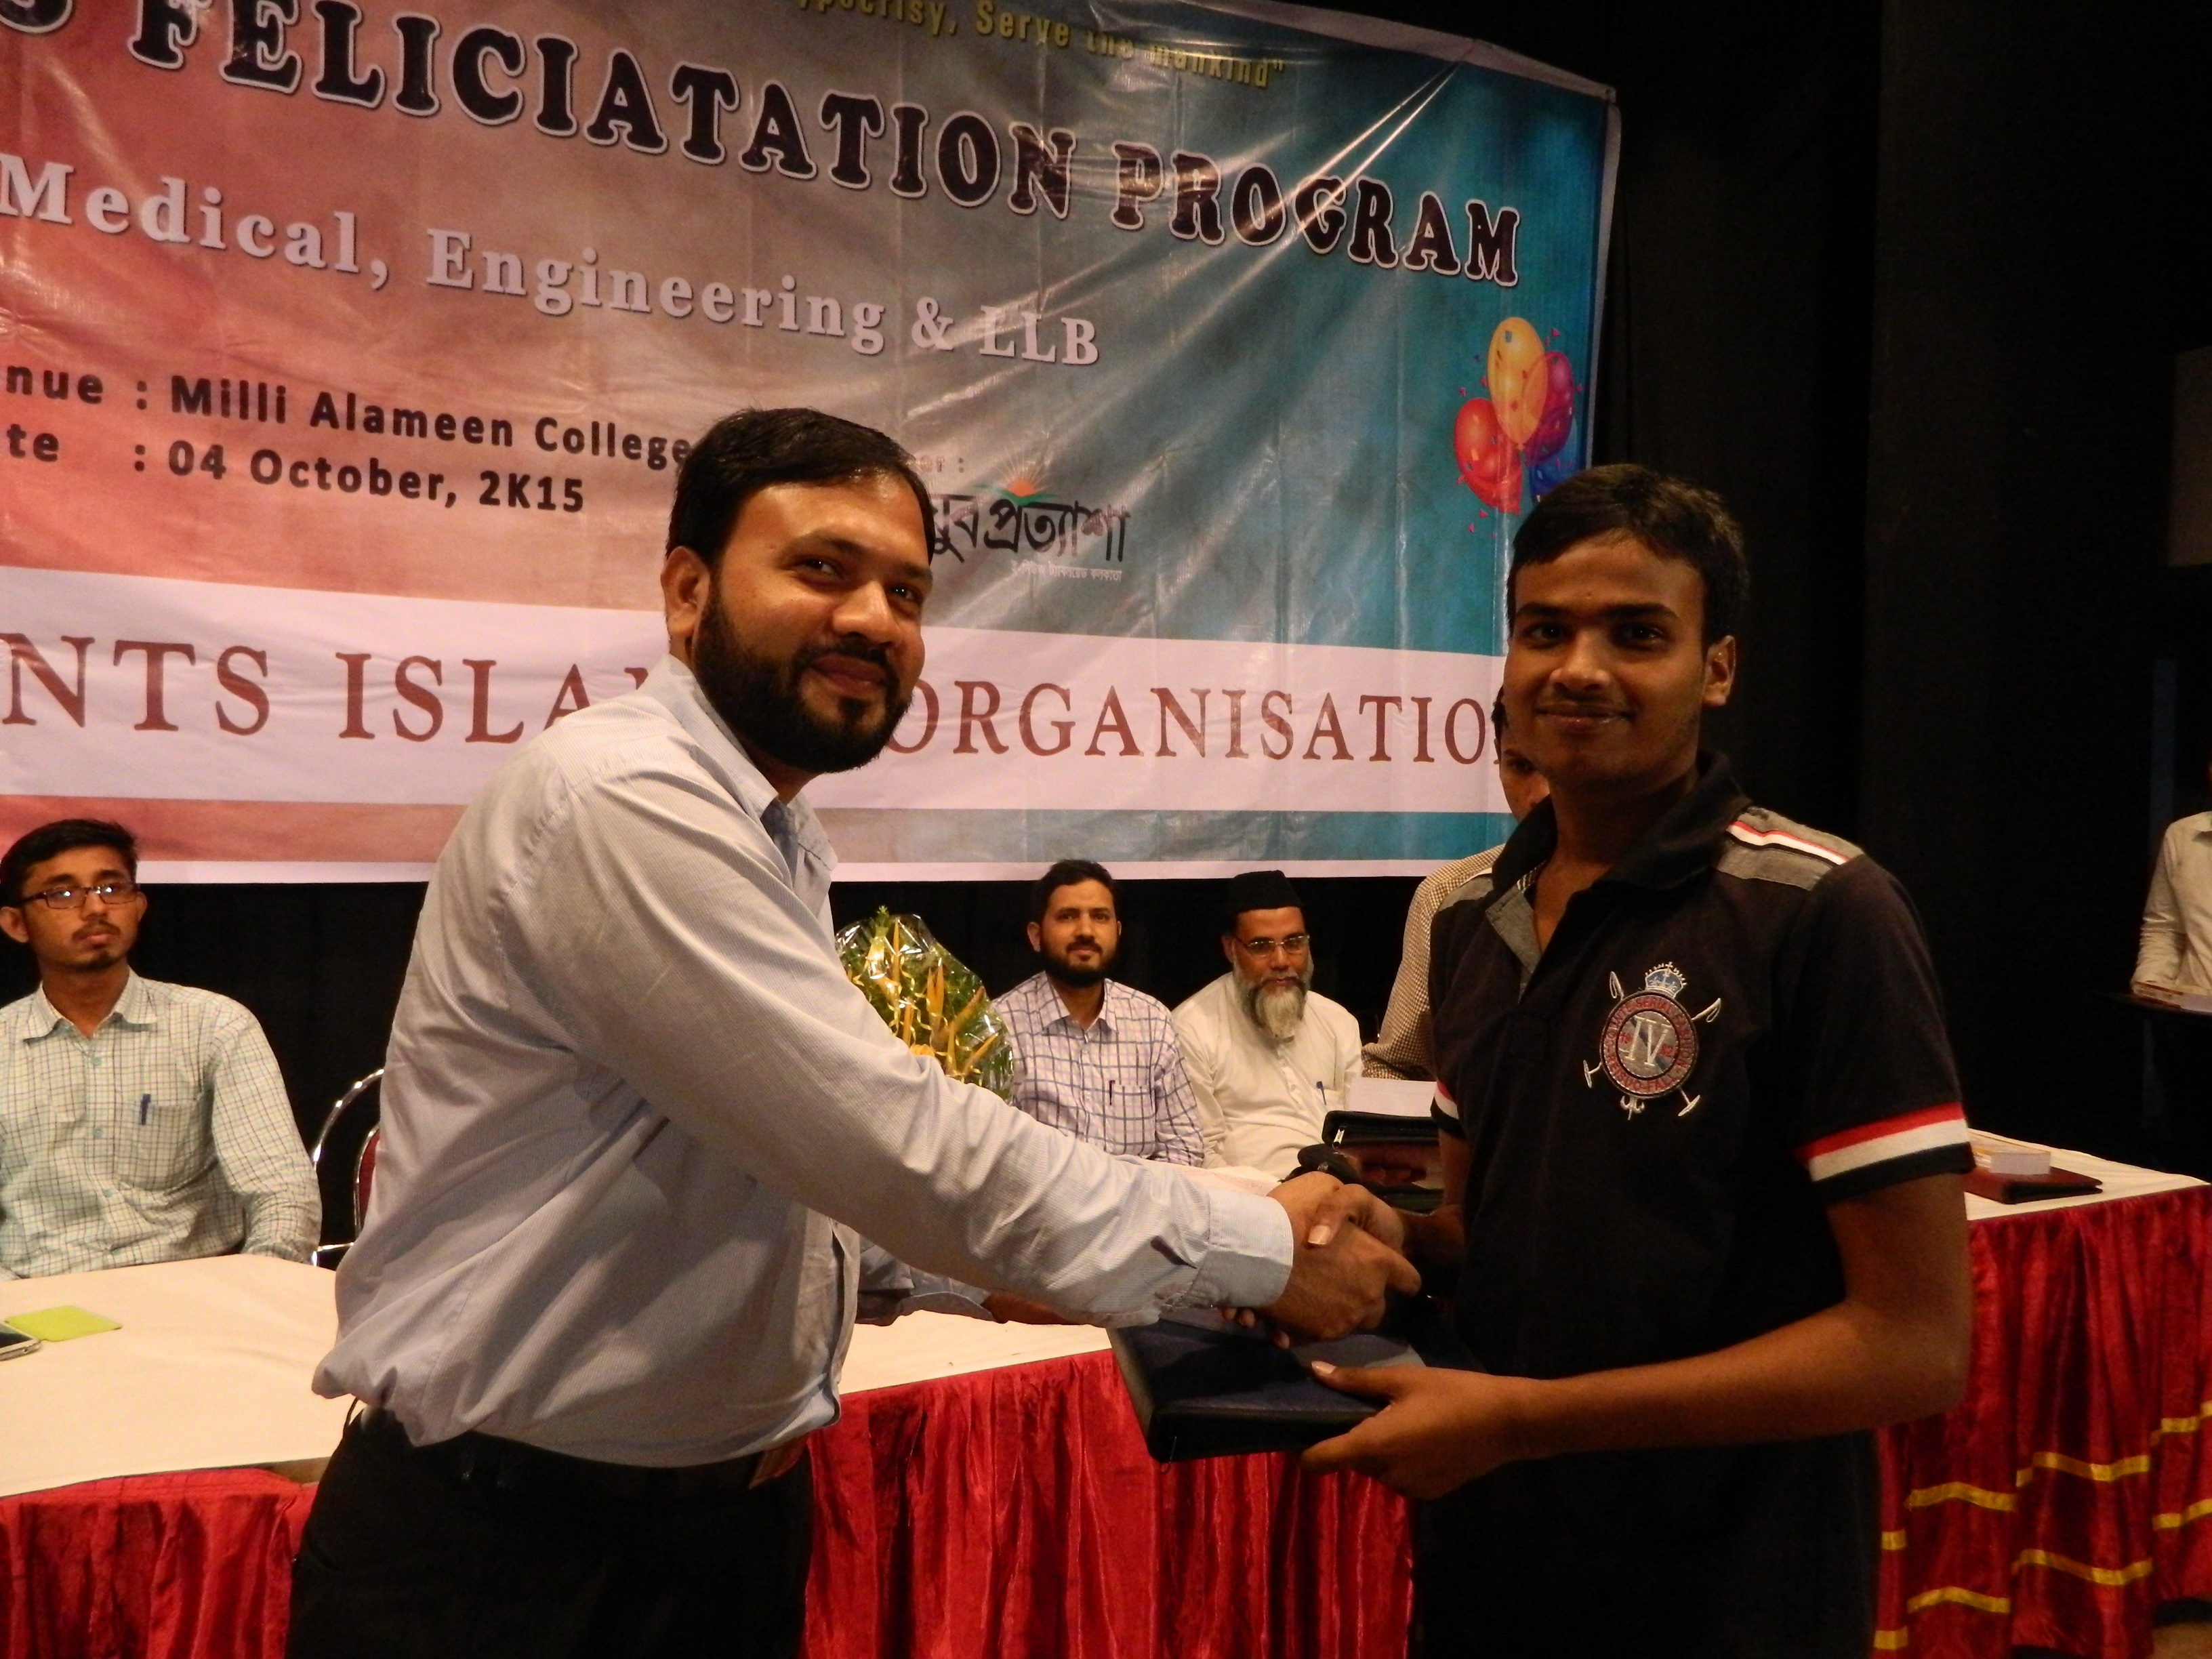 Freshers Felicitation Program by SIO West Bengal